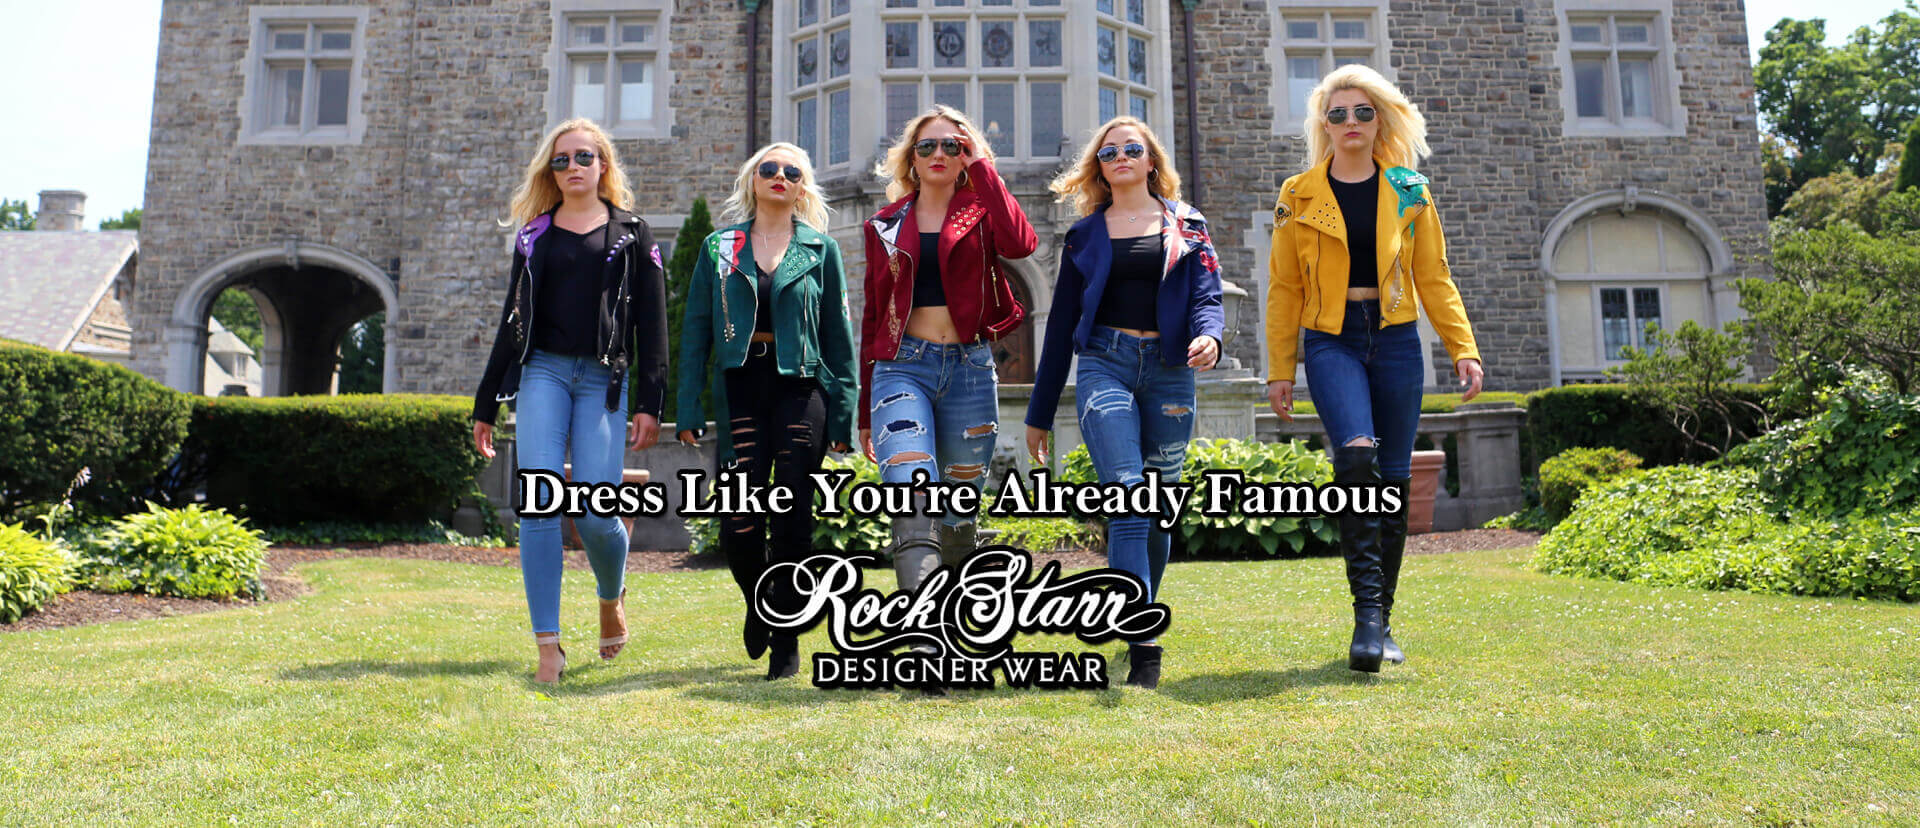 RockStarr Designer Wear Rock and Roll Fashions for Men and Women